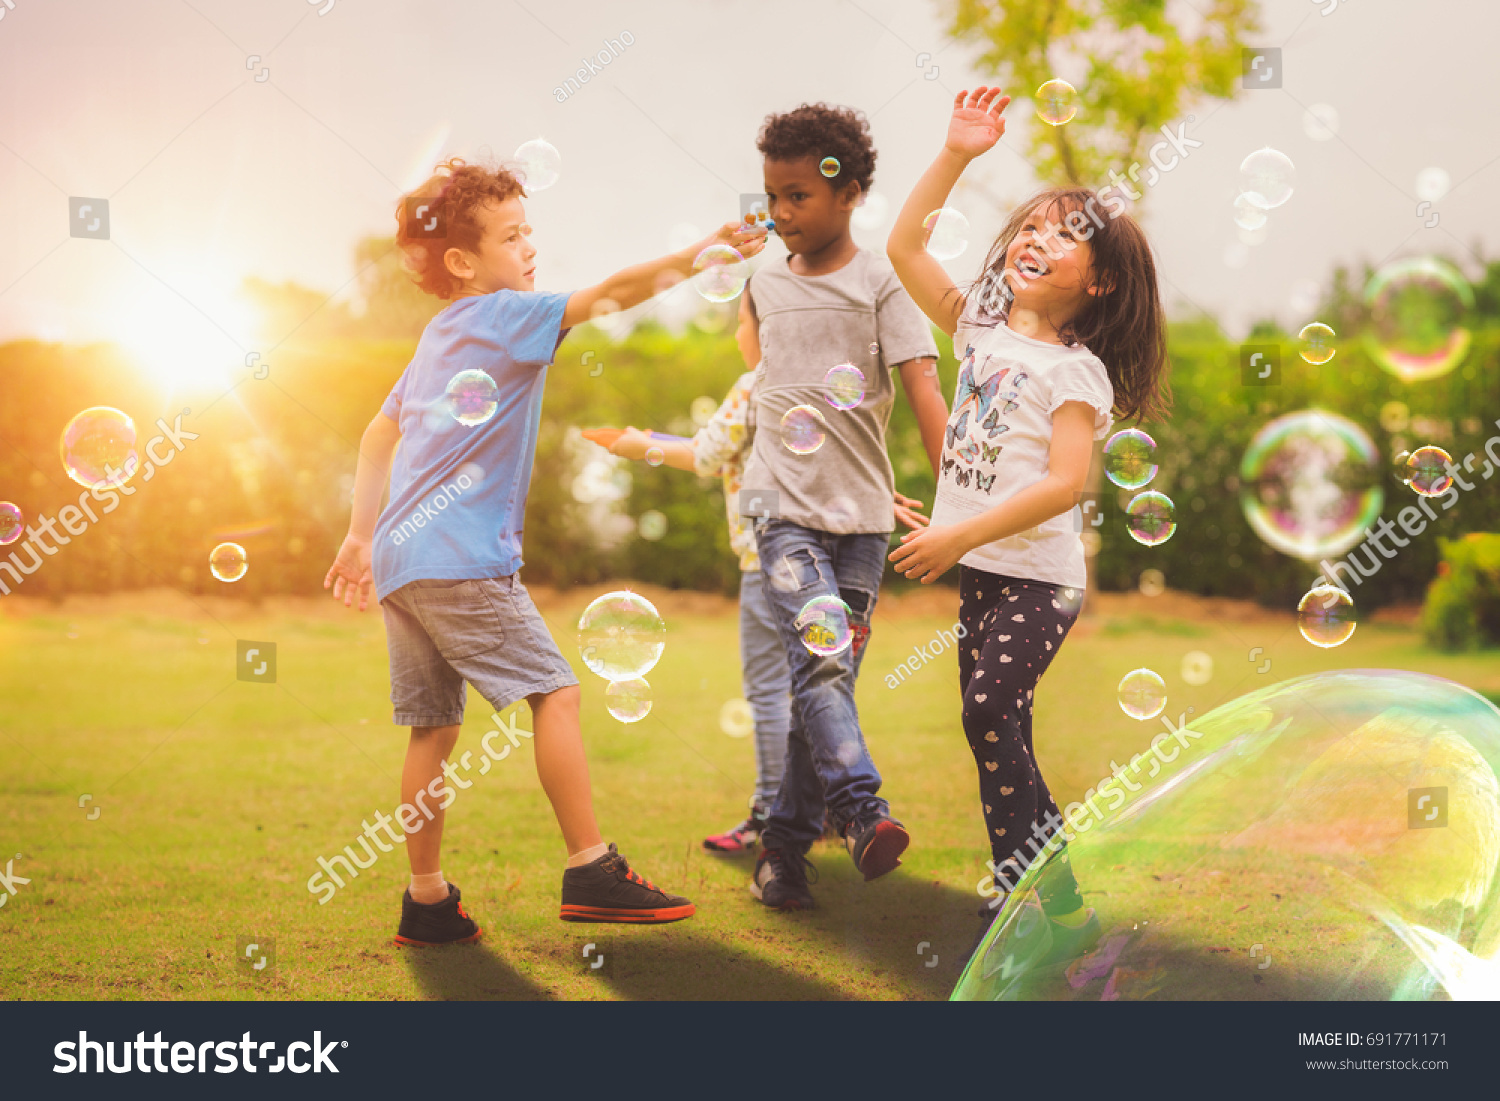 Kid and friends in international preschool play a bubble in playground with sunset background, kid, child, school, play and summer background #691771171